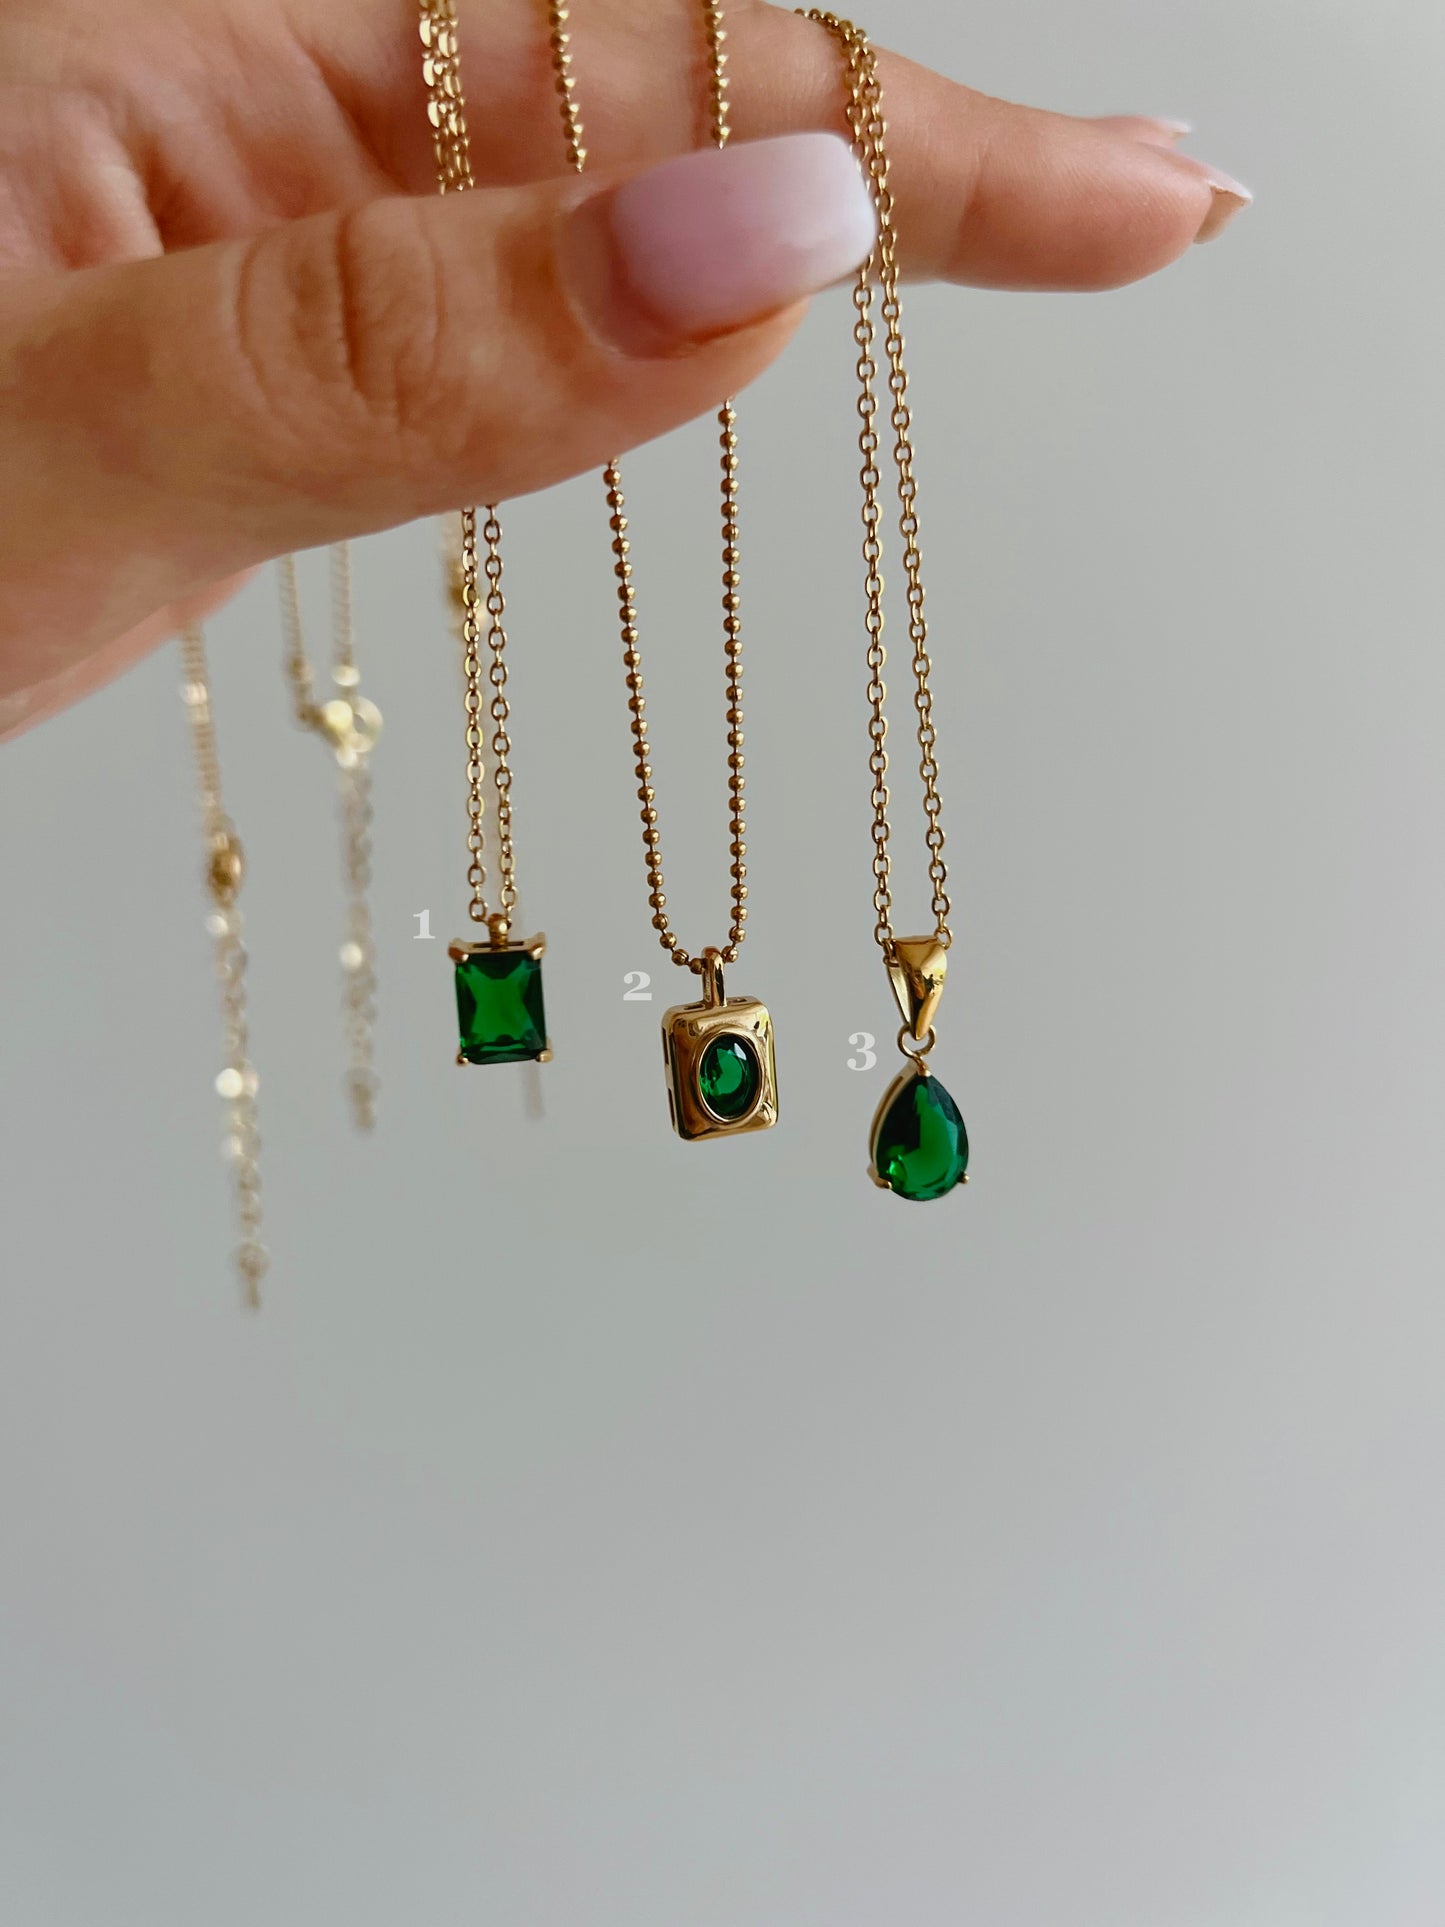 Green stone necklaces